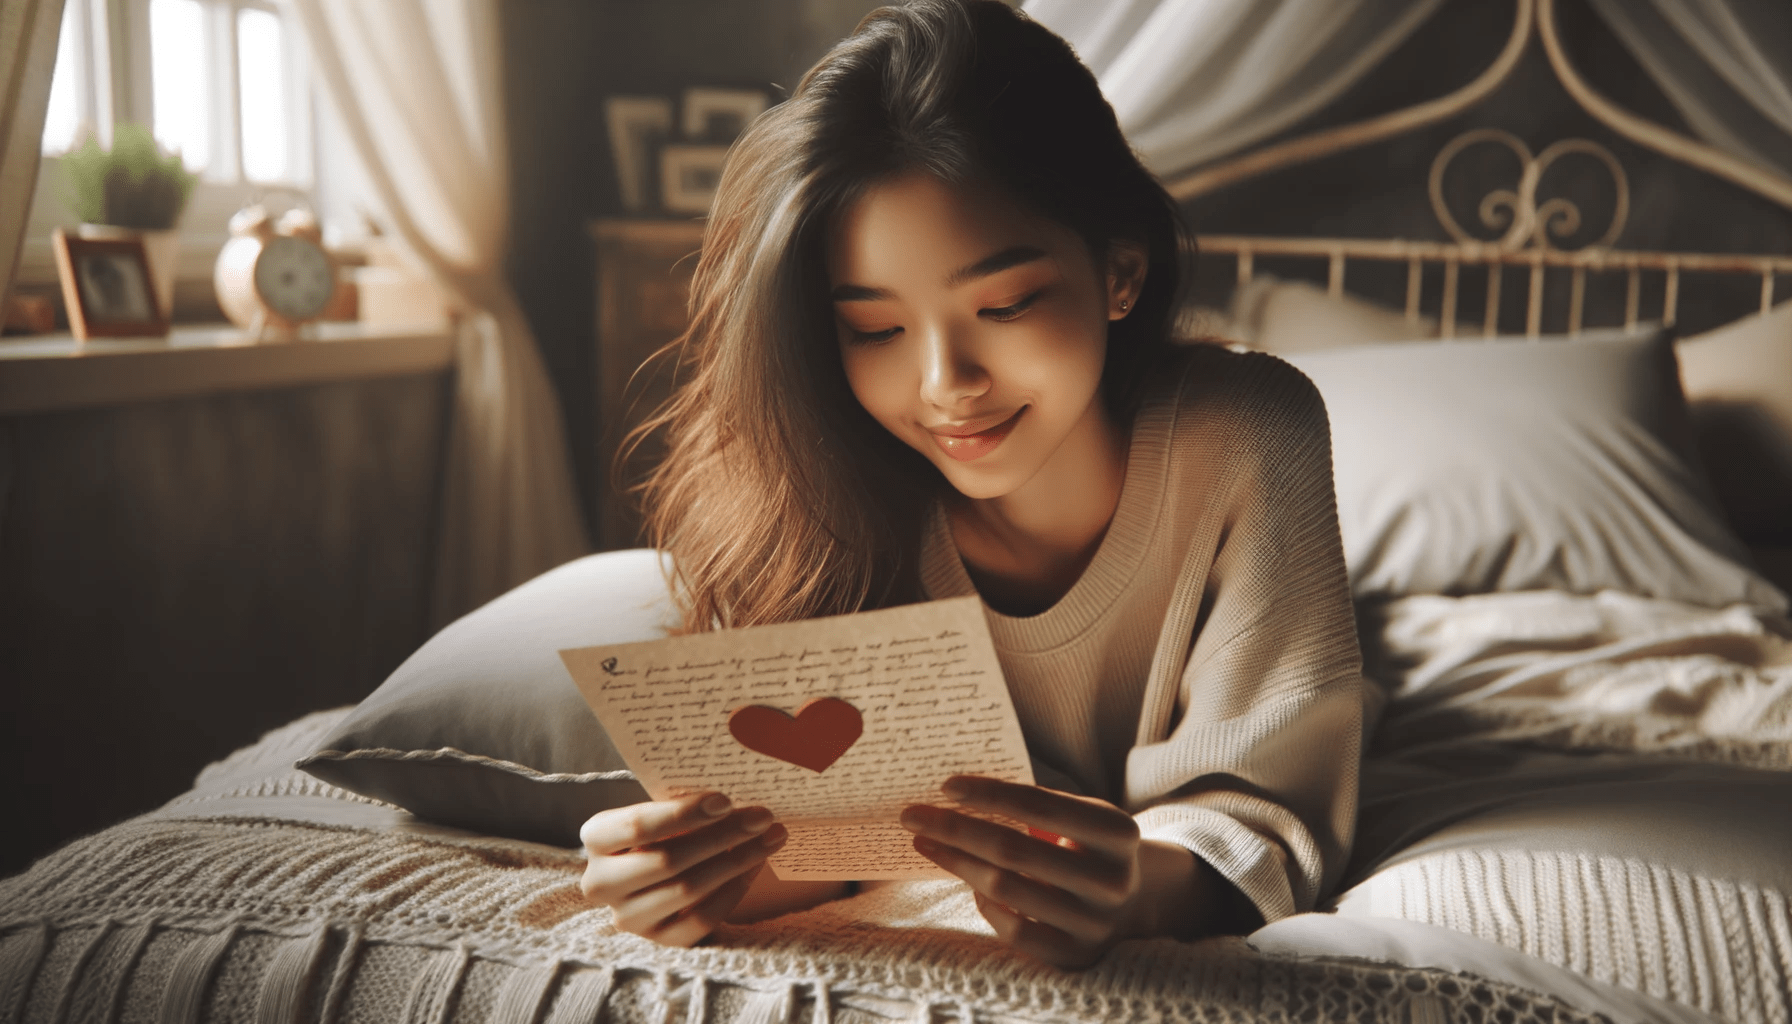 Funny love letters for her